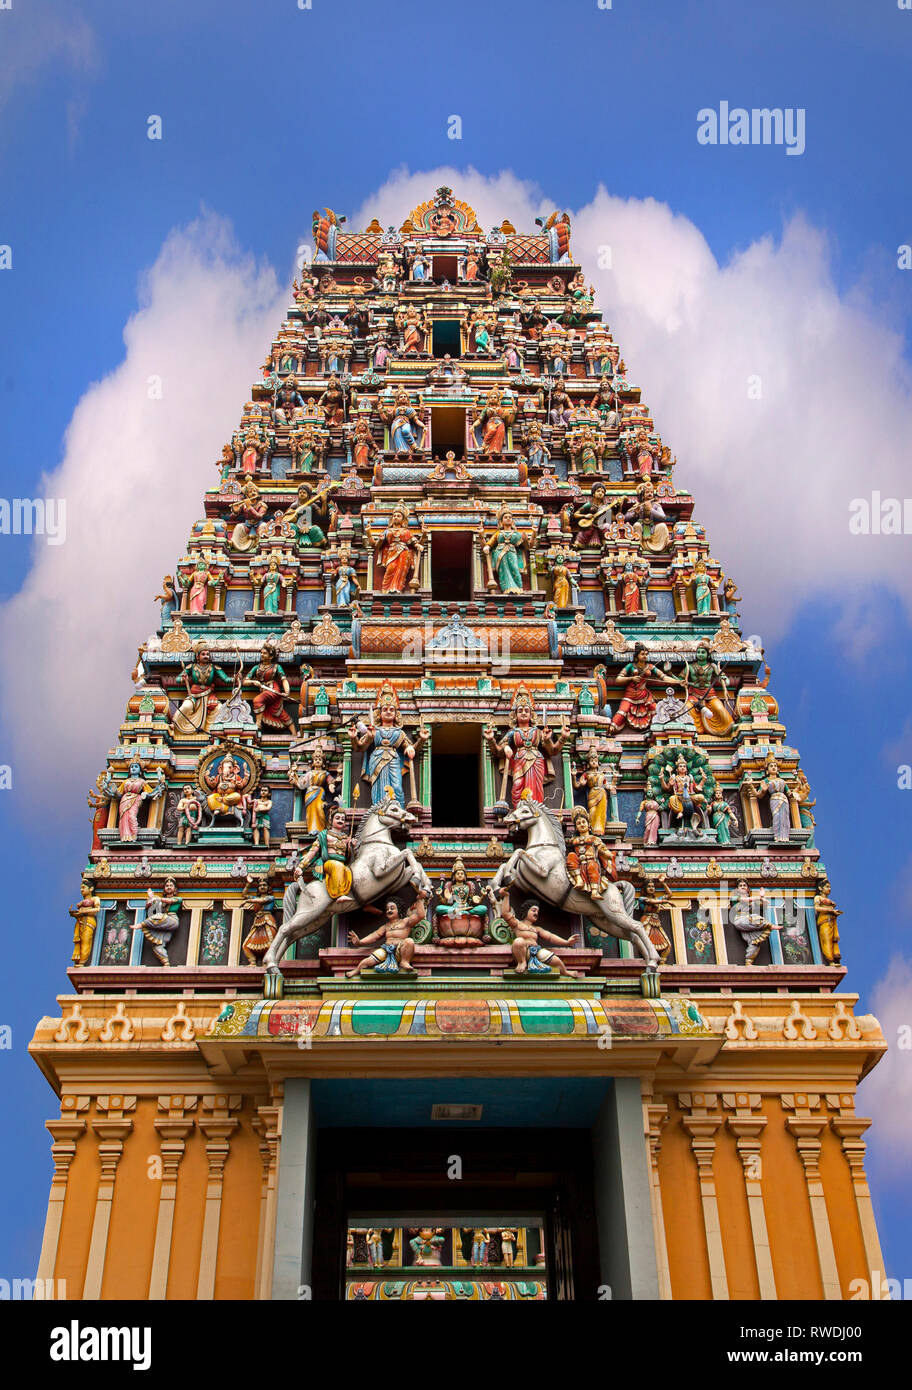 Sri Mariamman temple Dhevasthanam, featuring the ornate 'Raja Gopuram' tower in the style of South Indian temples. Kuala Lumpur, Malaysia Stock Photo